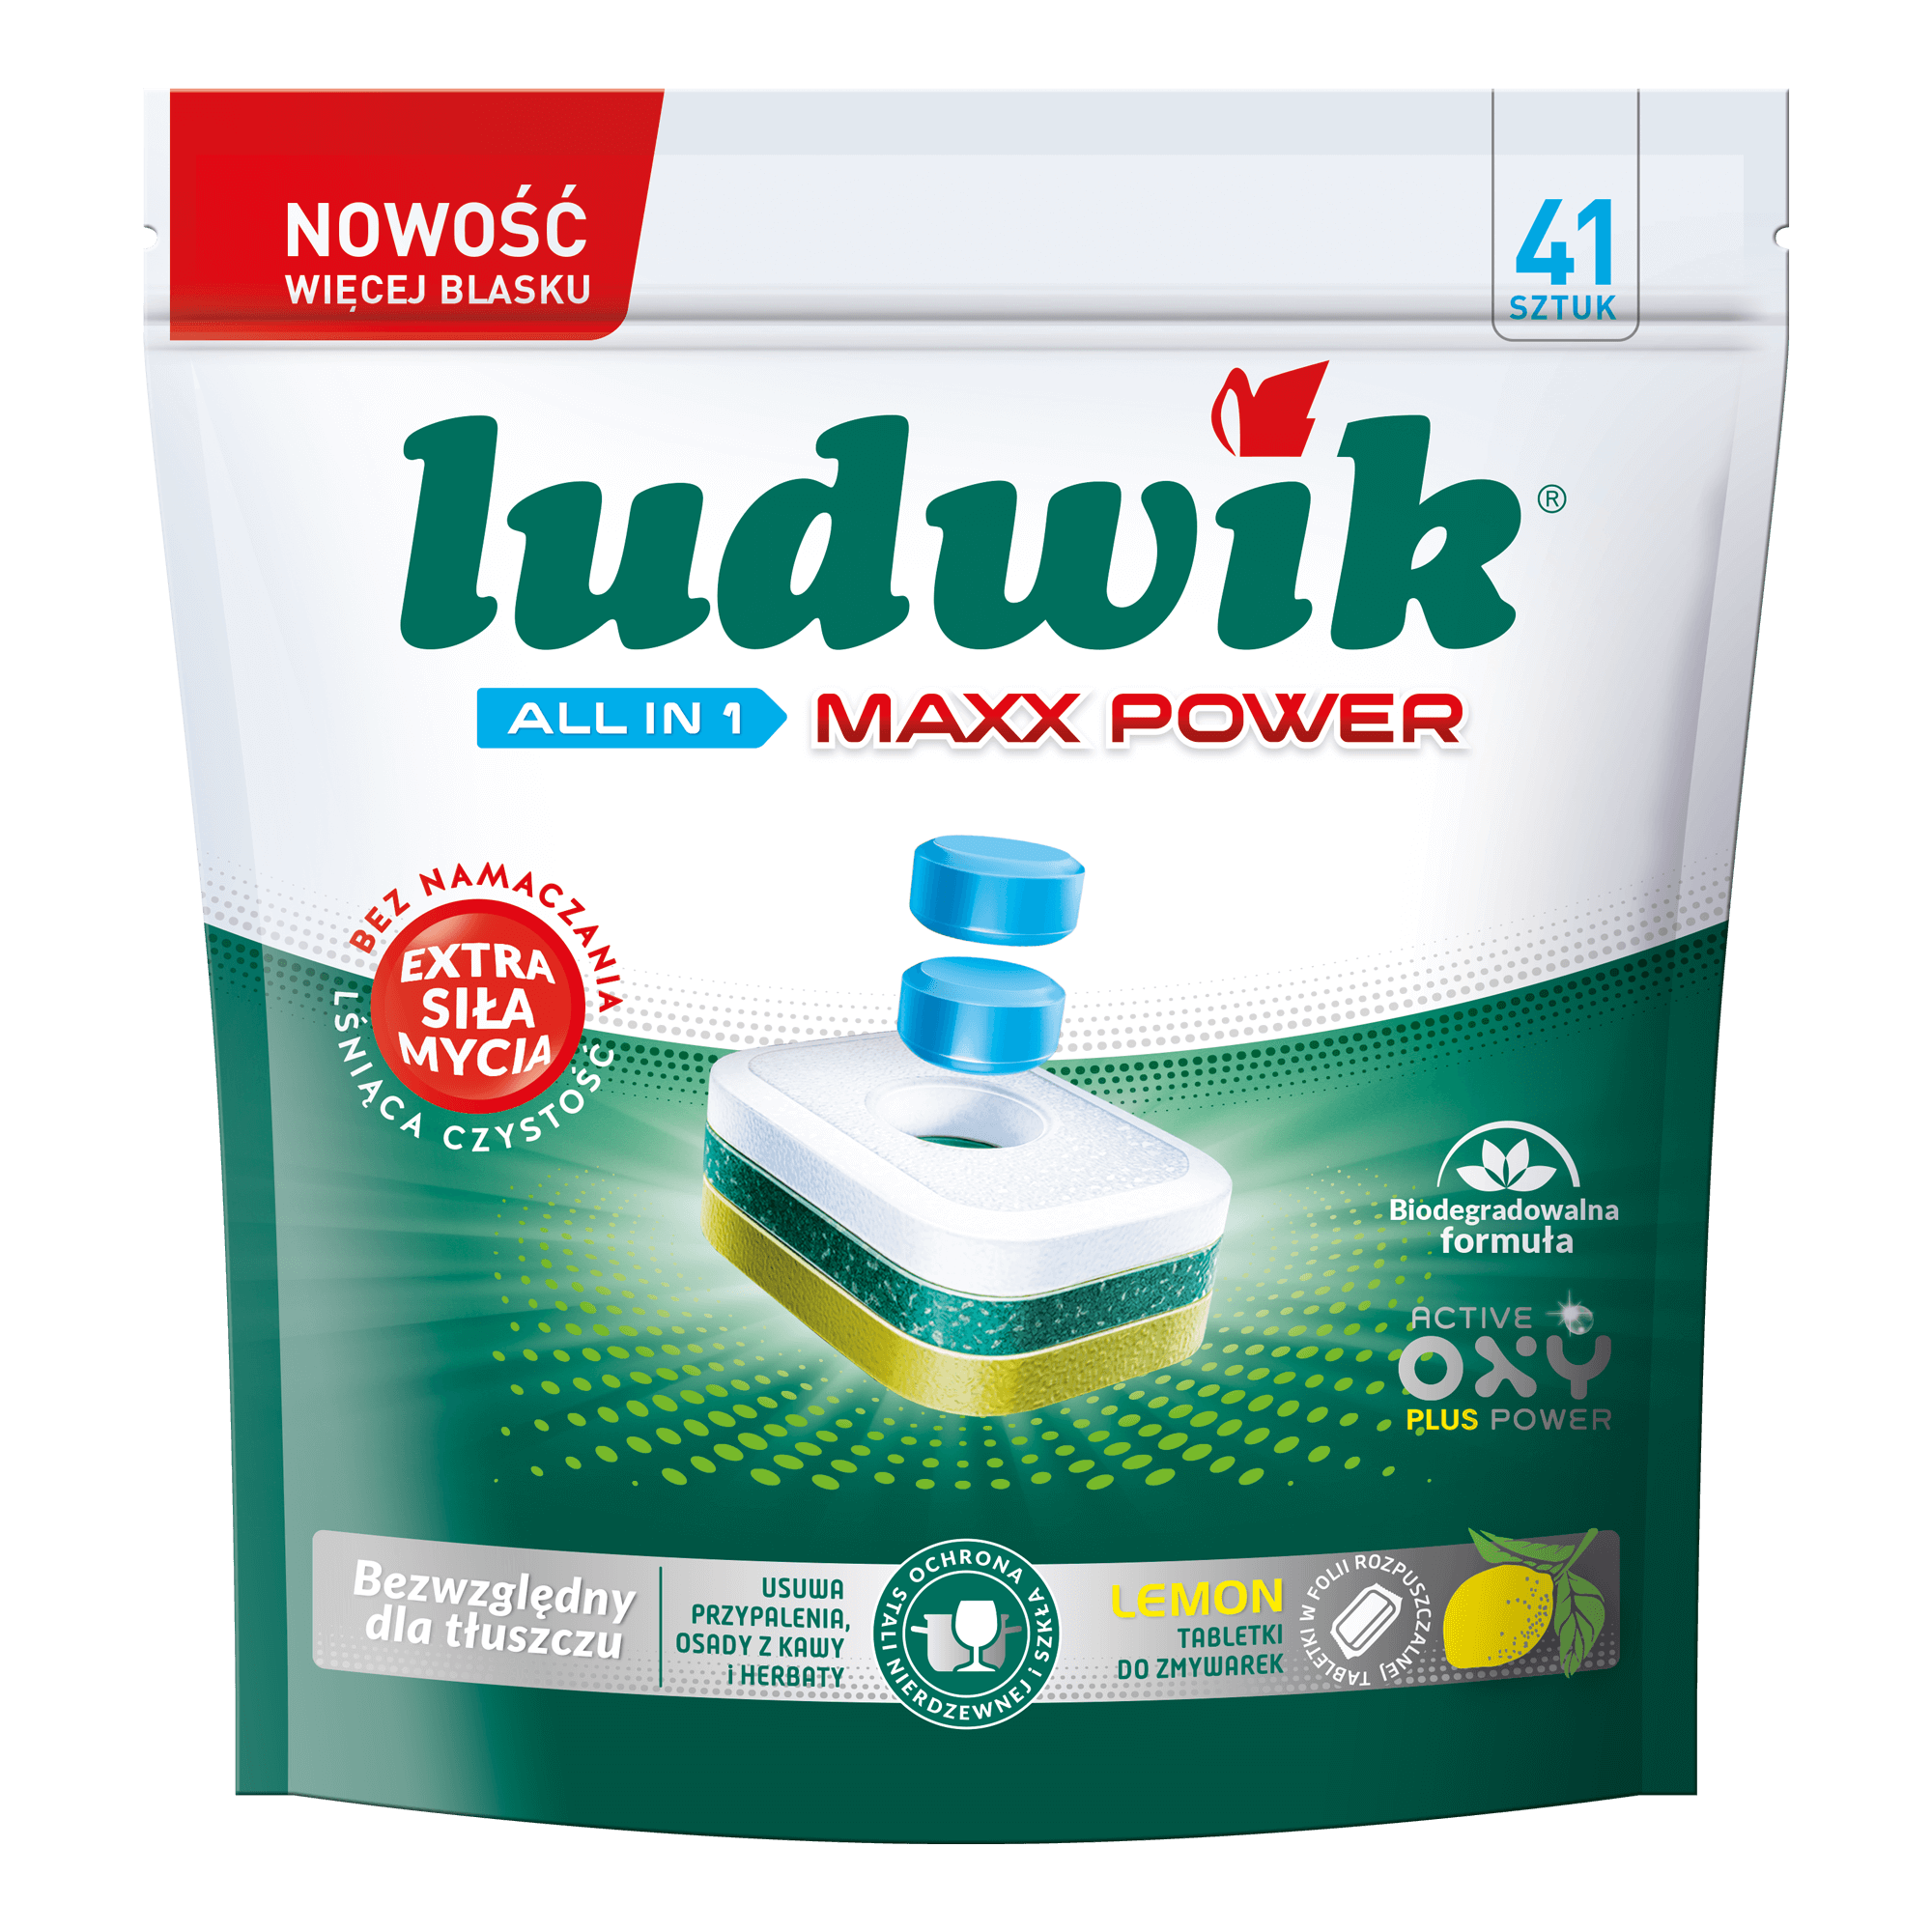 All in 1 Maxx Power dishwasher tablets in soluble film lemon